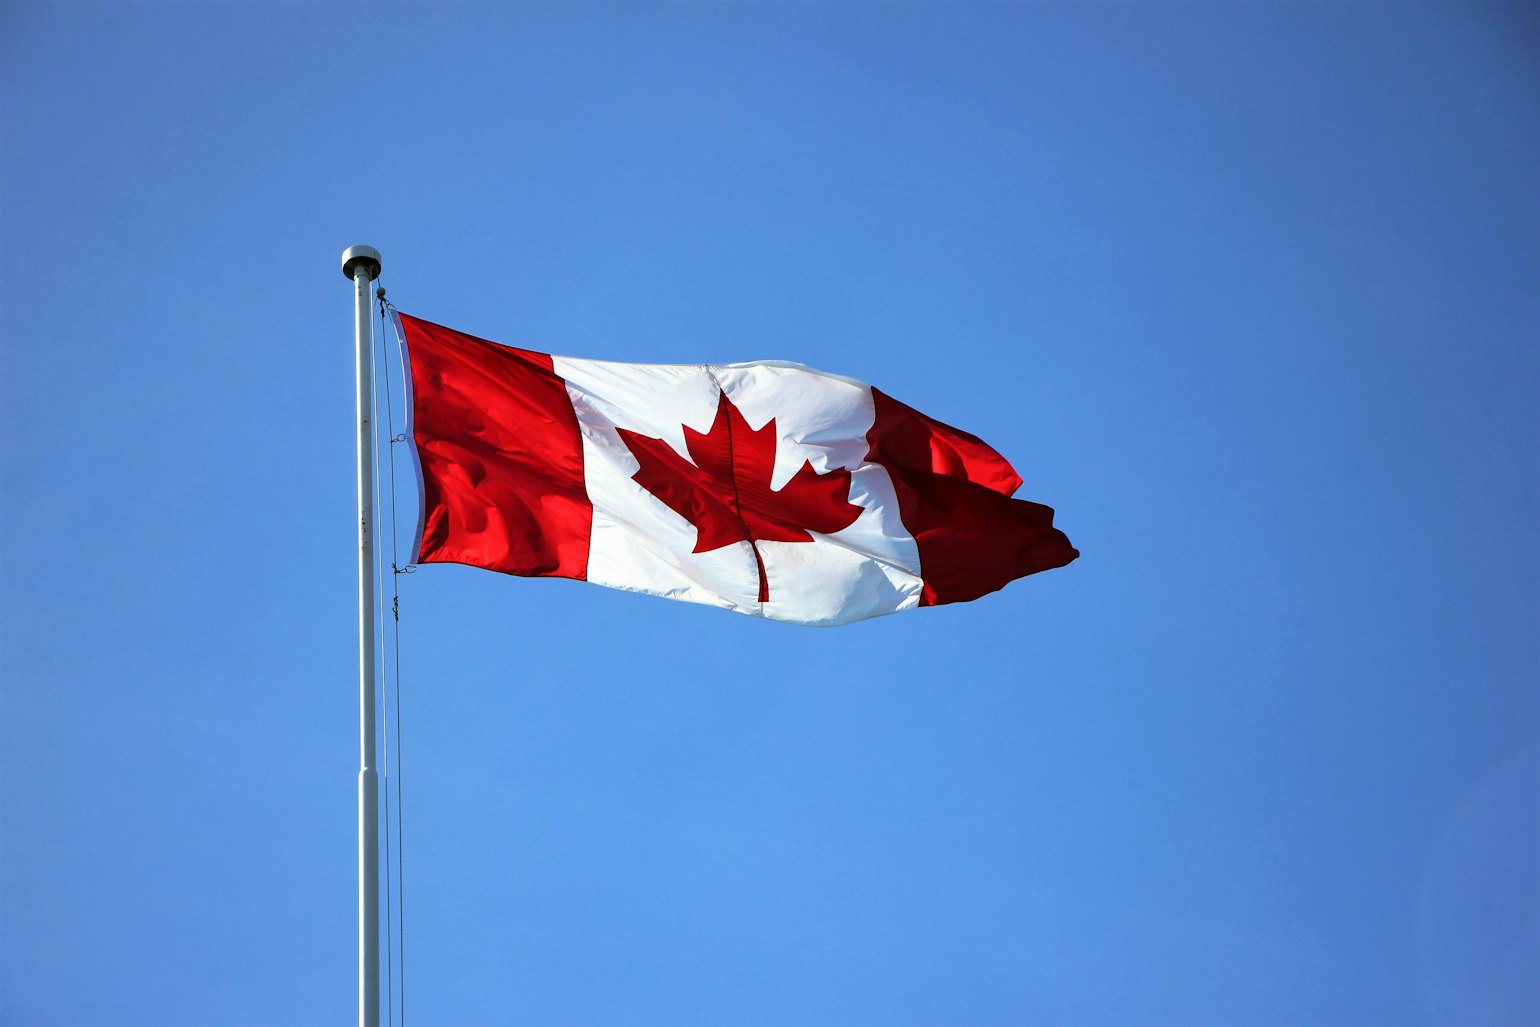 Photo of the Canada flag in a blue background